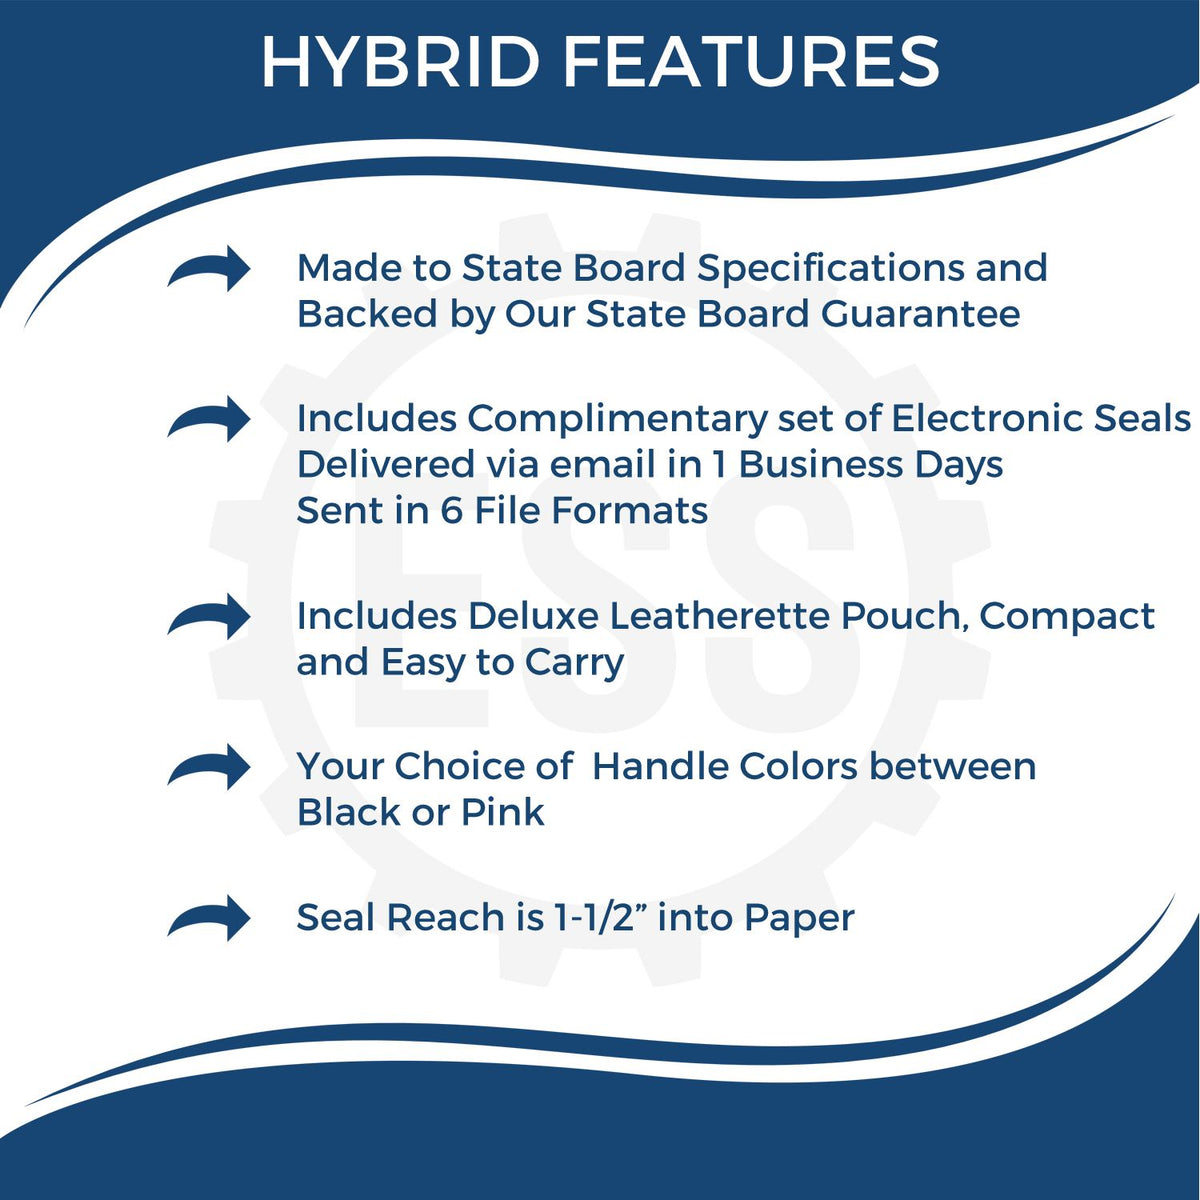 A picture of an infographic highlighting the selling points for the Hybrid Washington Architect Seal